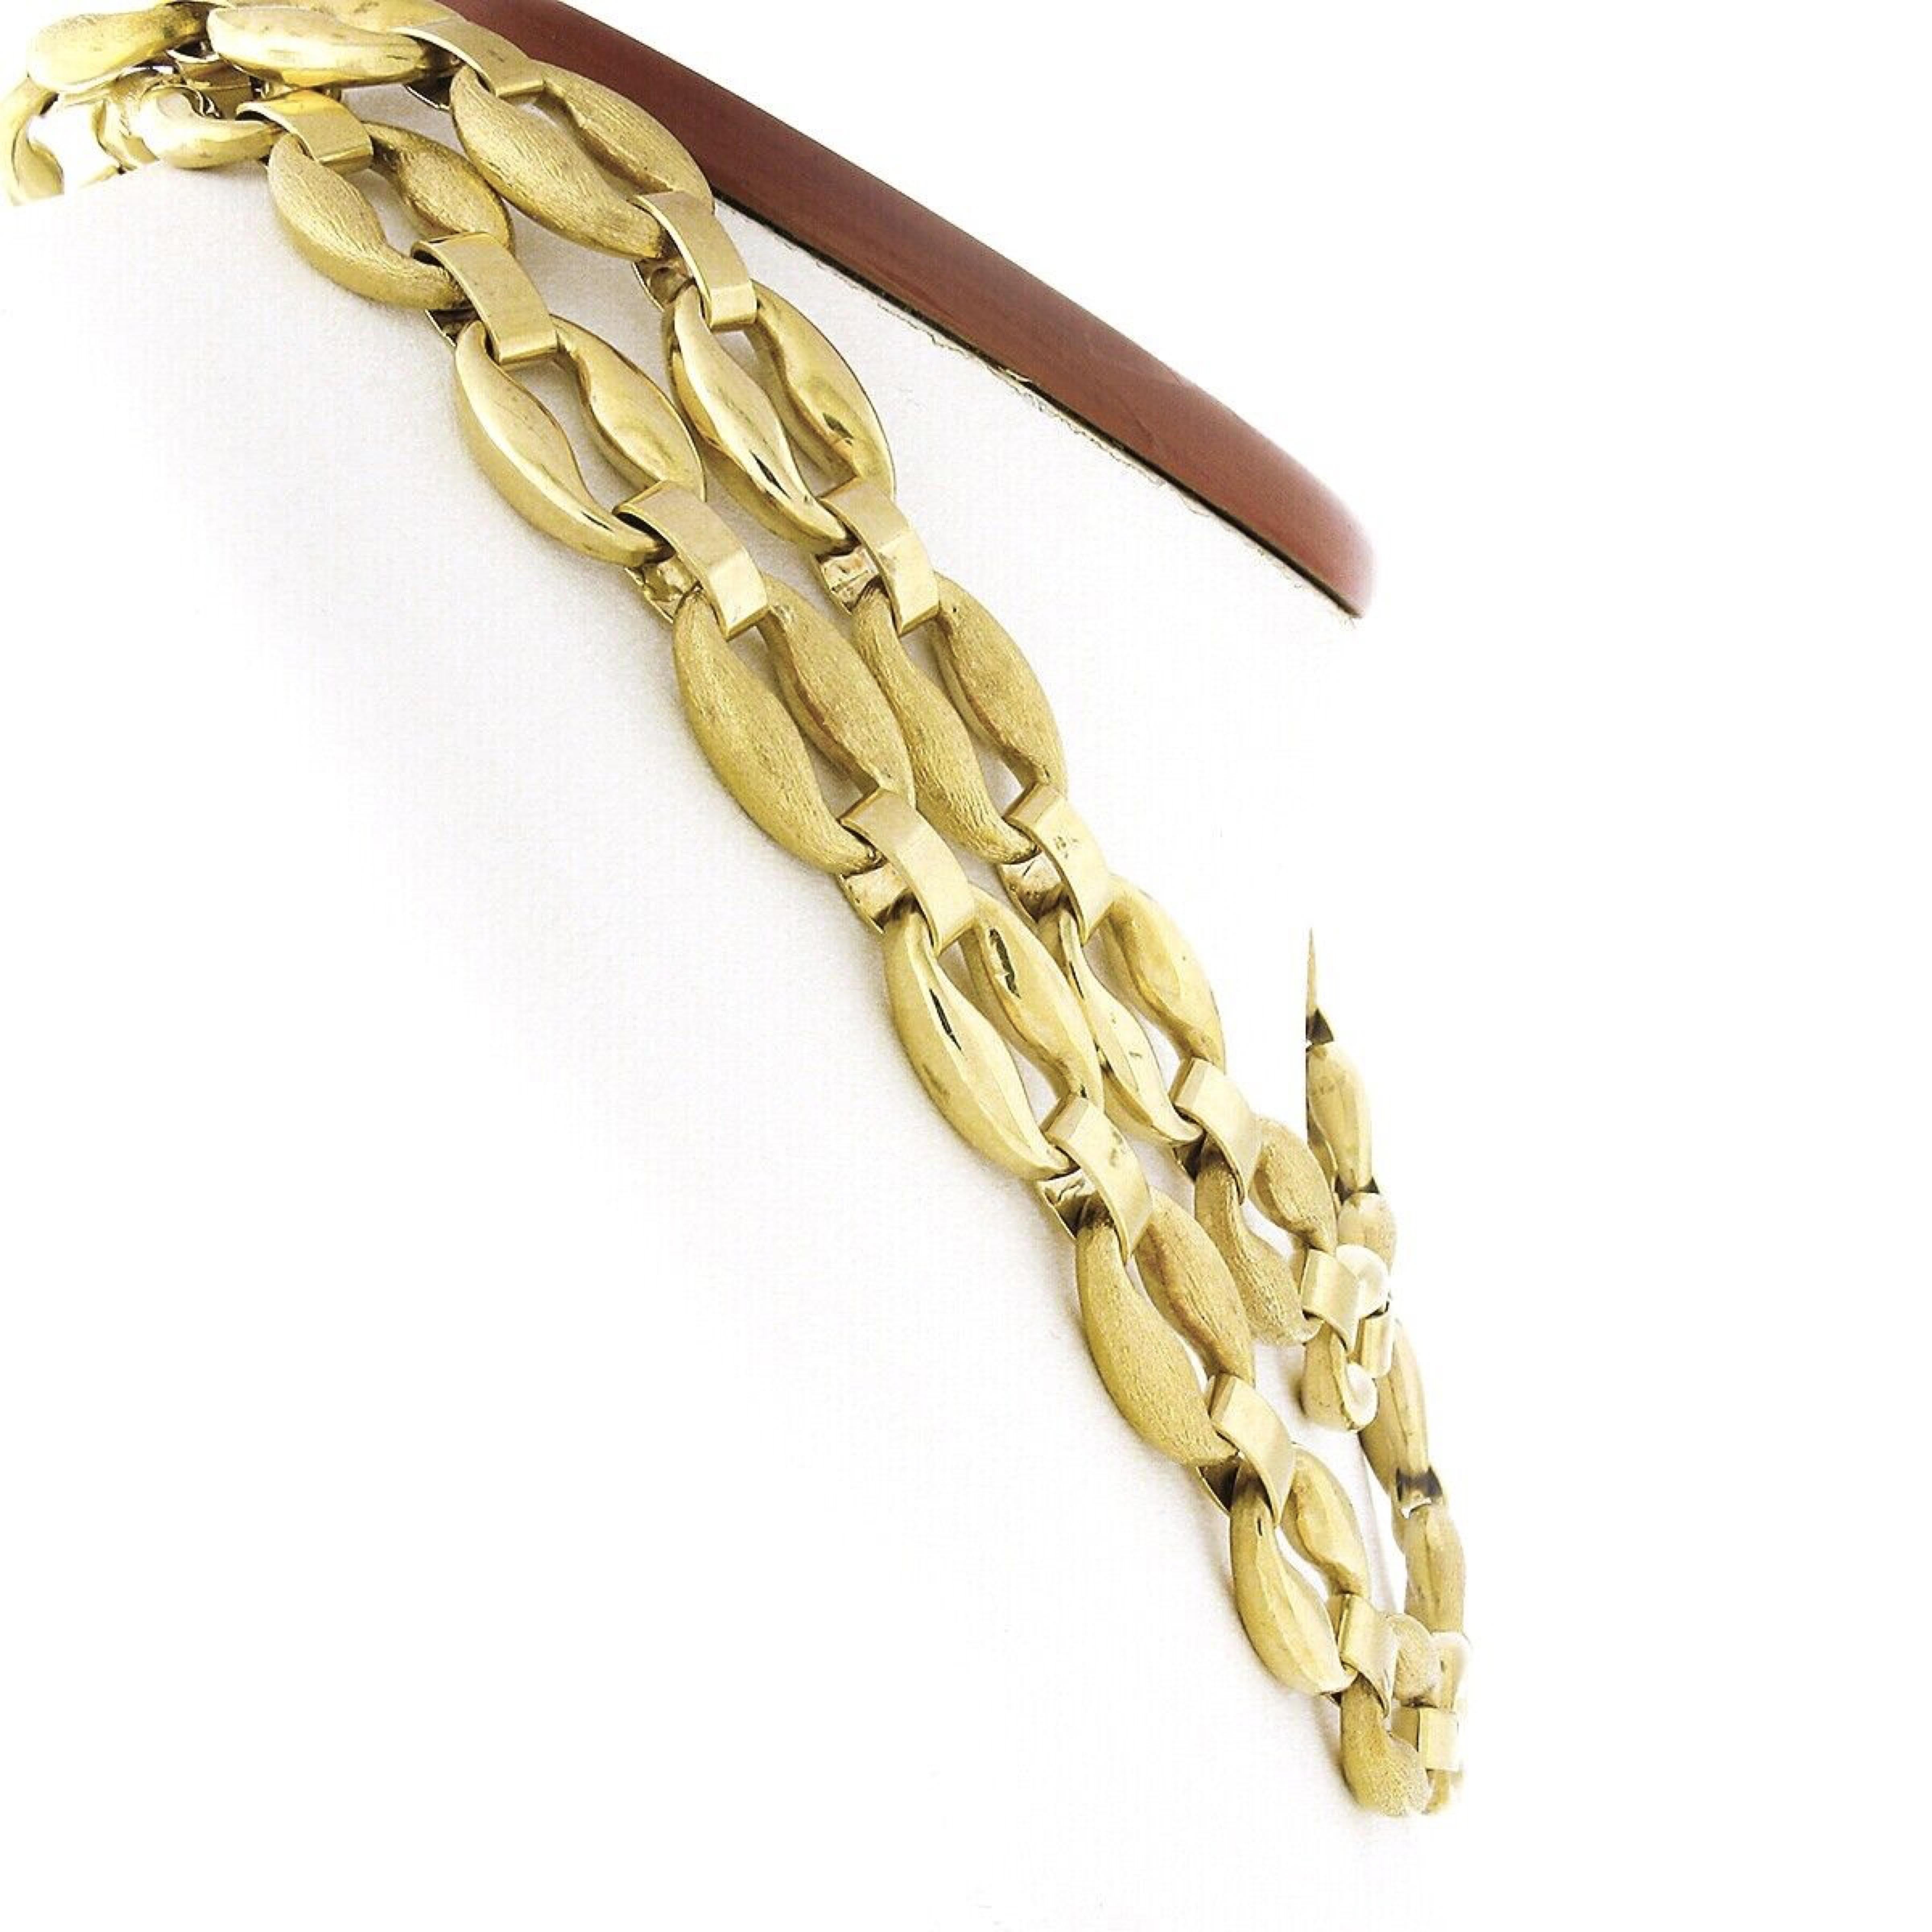 This long and fancy chain necklace is very well crafted in solid 18k yellow gold and features a beautiful design that is constructed from large oval links that alternate with a high polished and brushed finish entirely throughout one side of the